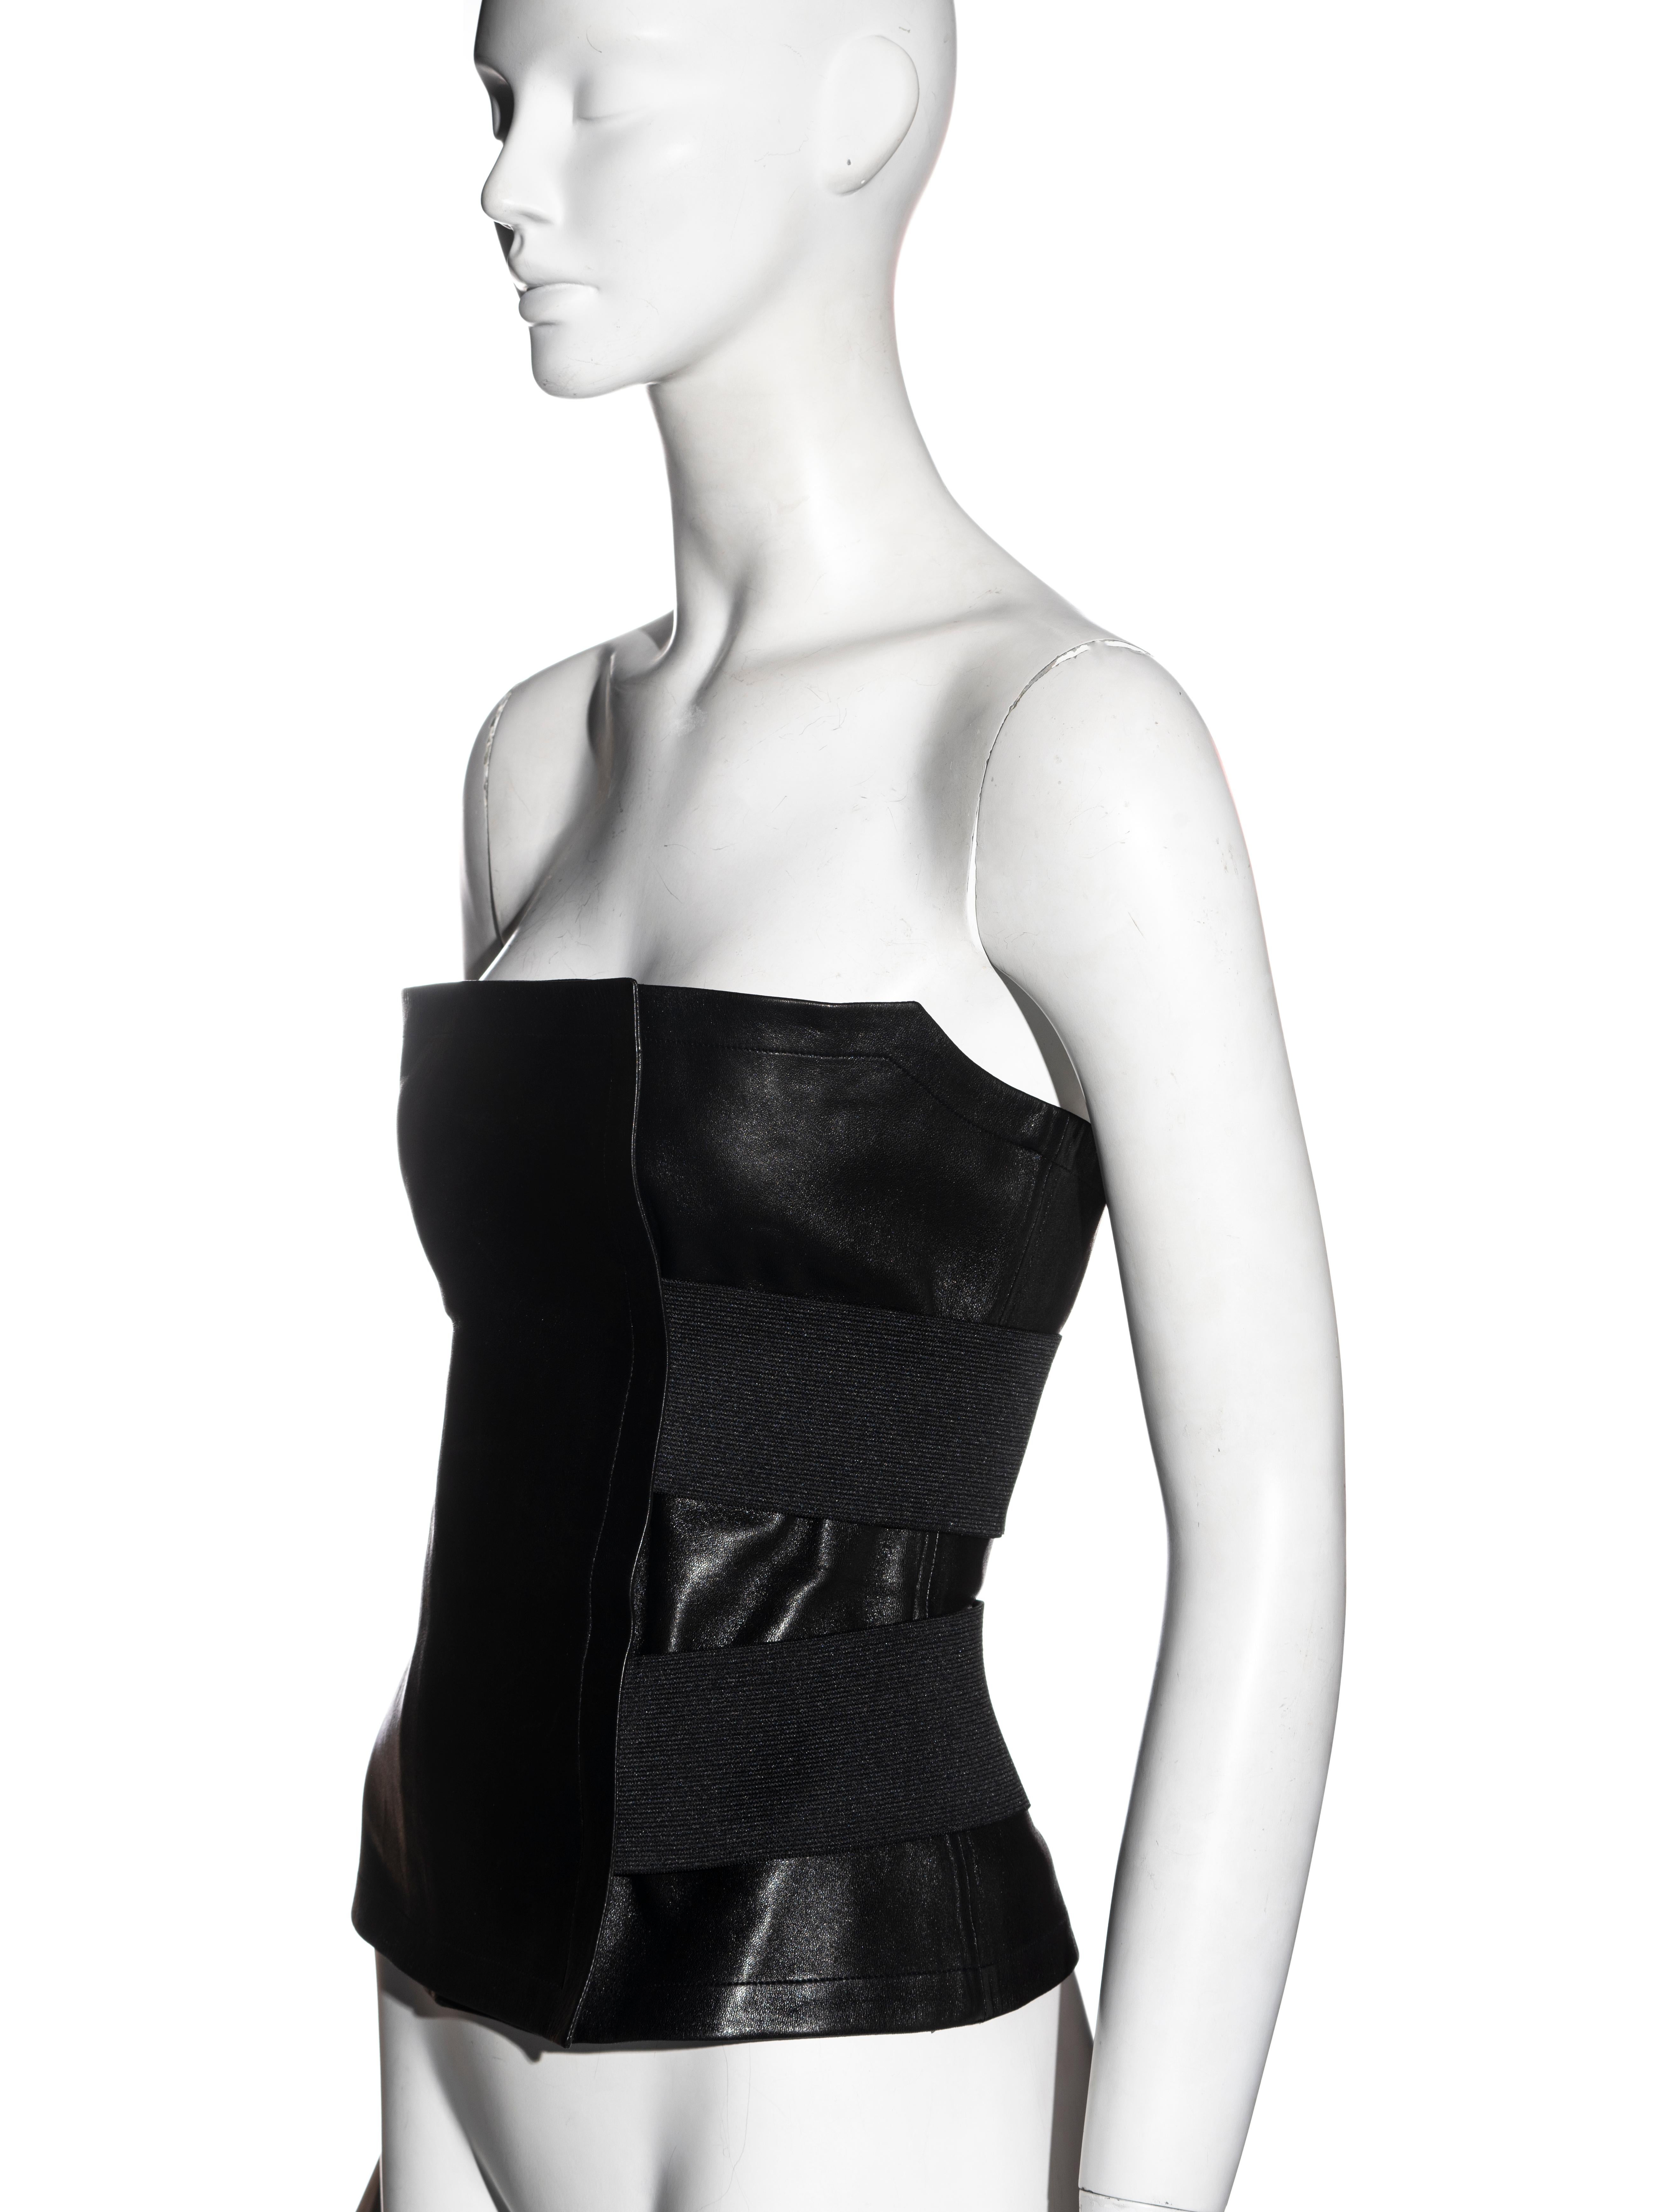 Black Yves Saint Laurent by Tom Ford black leather strapless wrap corset, ss 2001